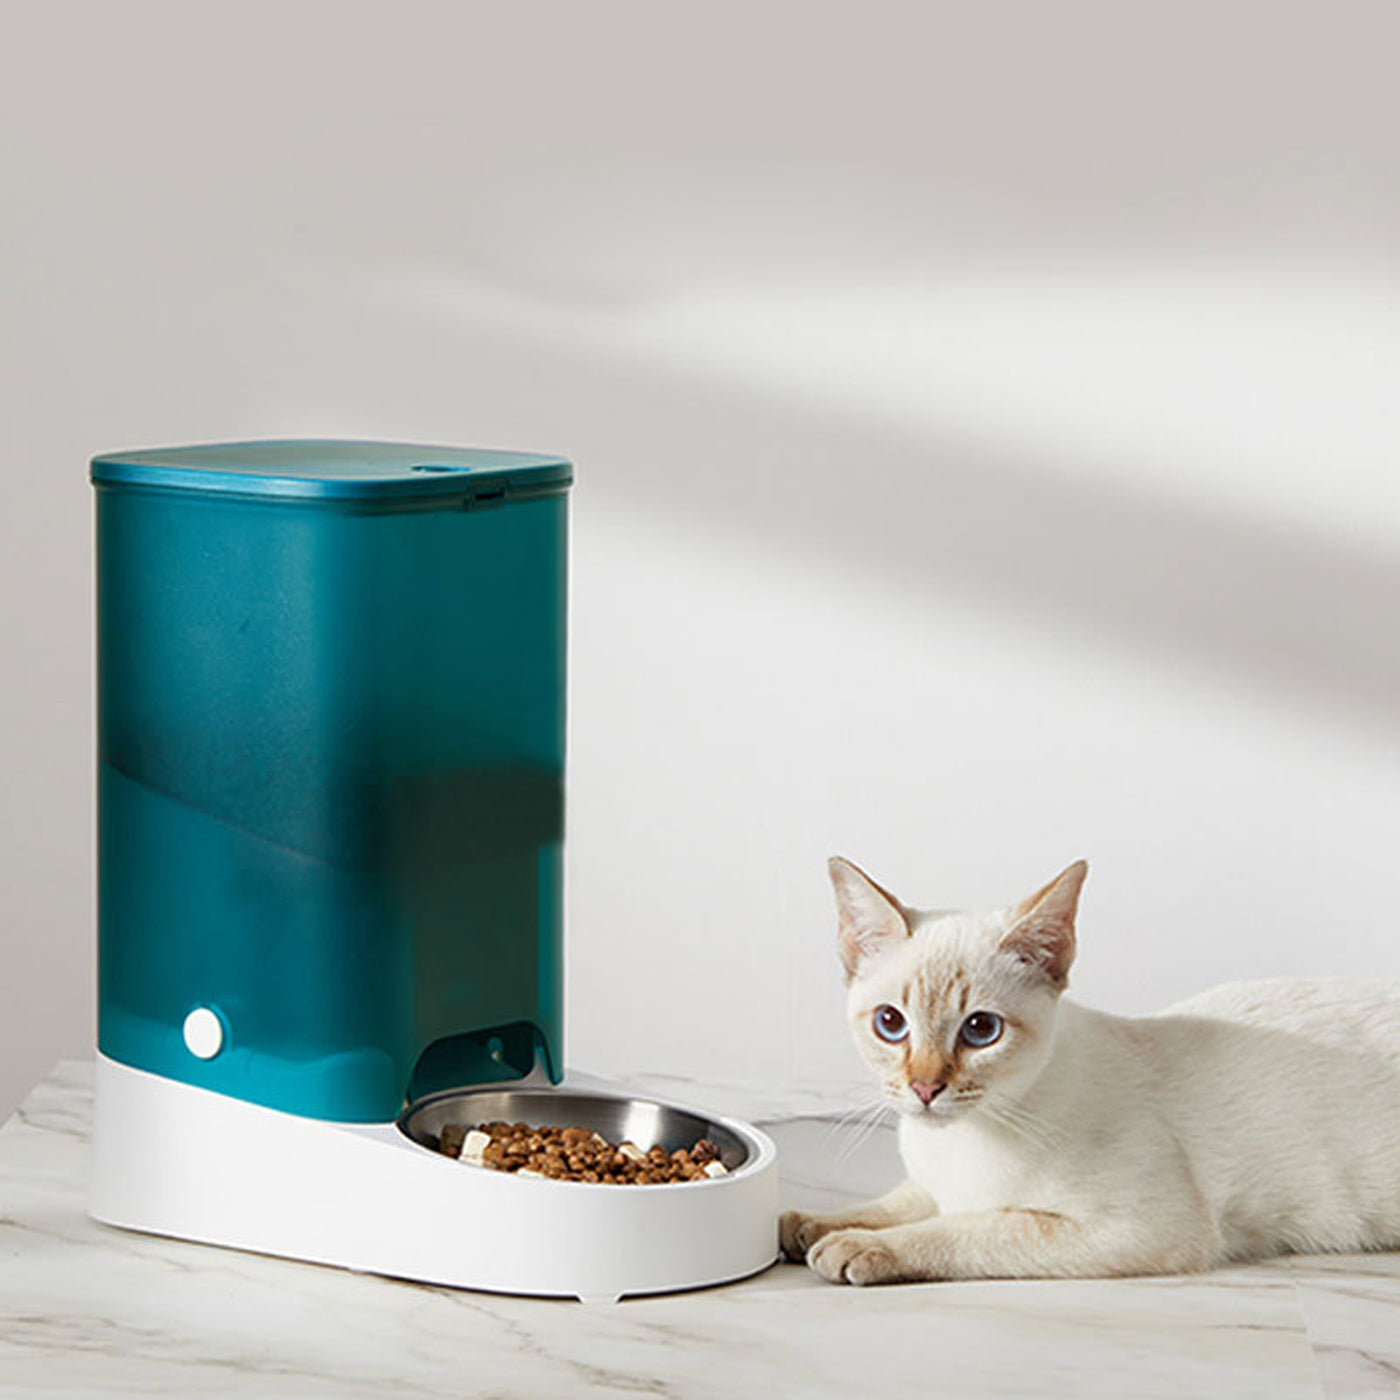 Automatic Cat Feeder, Wi-Fi Enabled Smart Pet Feeder for Cats and Dogs, Compatible for Freeze-Dried Pet Food, Stainless Steel Bowl